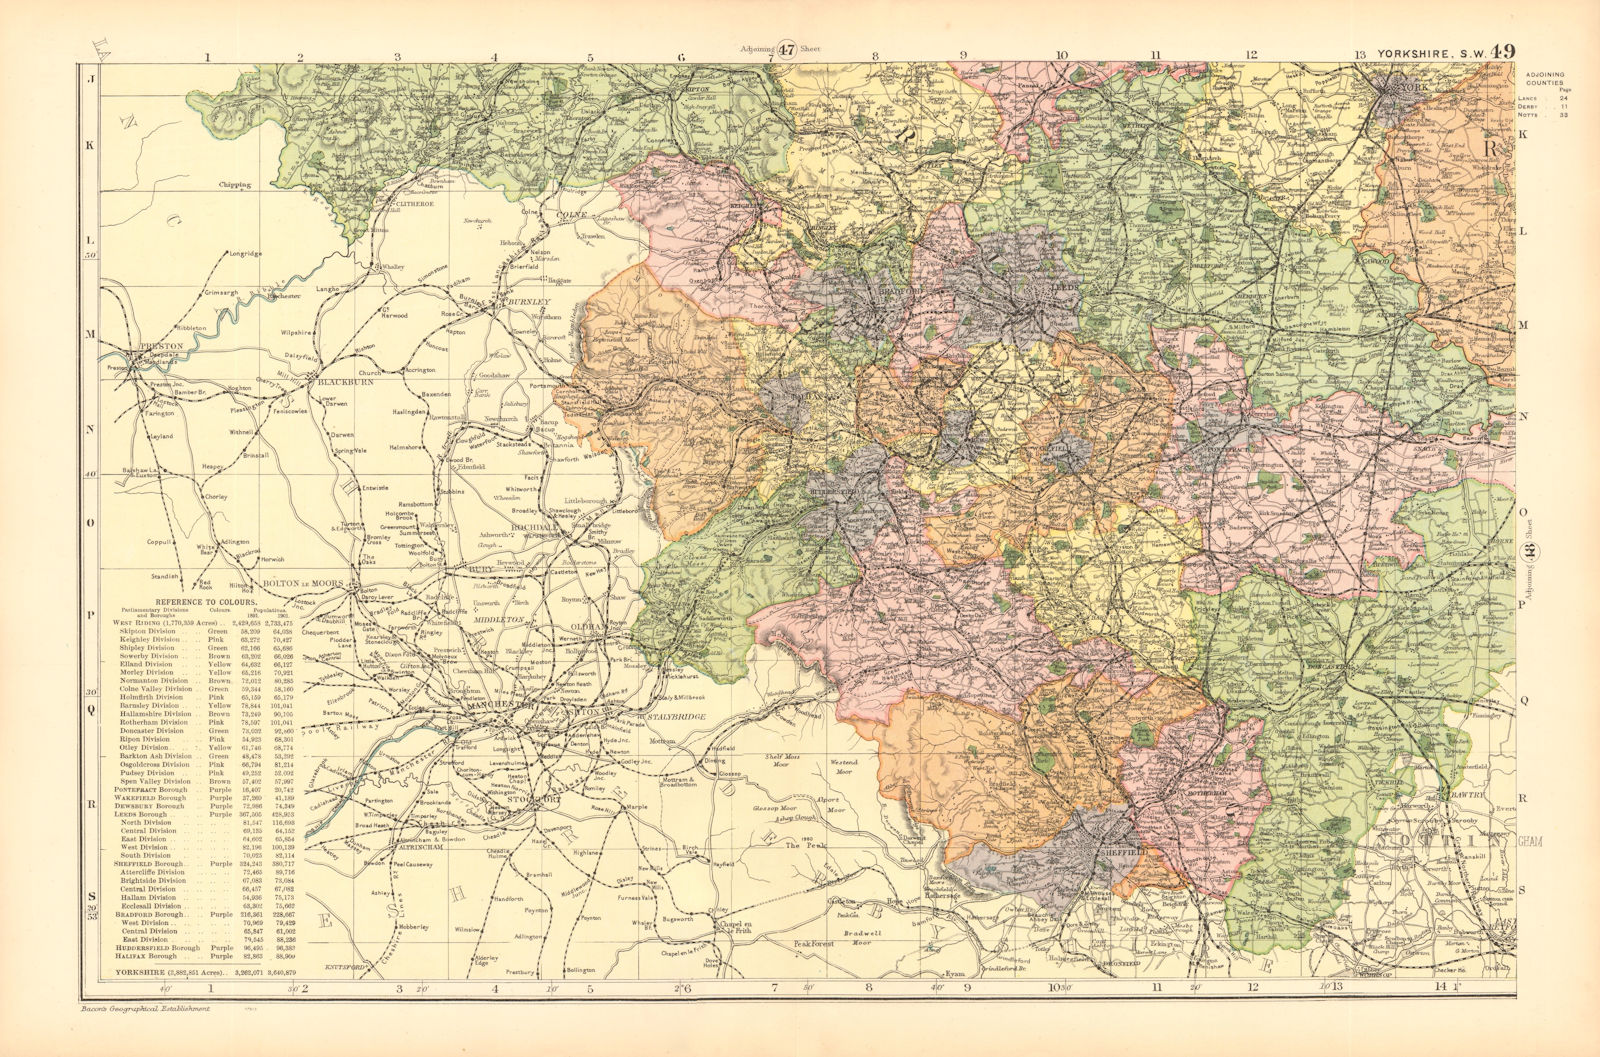 YORKSHIRE (SOUTH WEST). Showing Parliamentary divisions & parks. BACON 1904 map